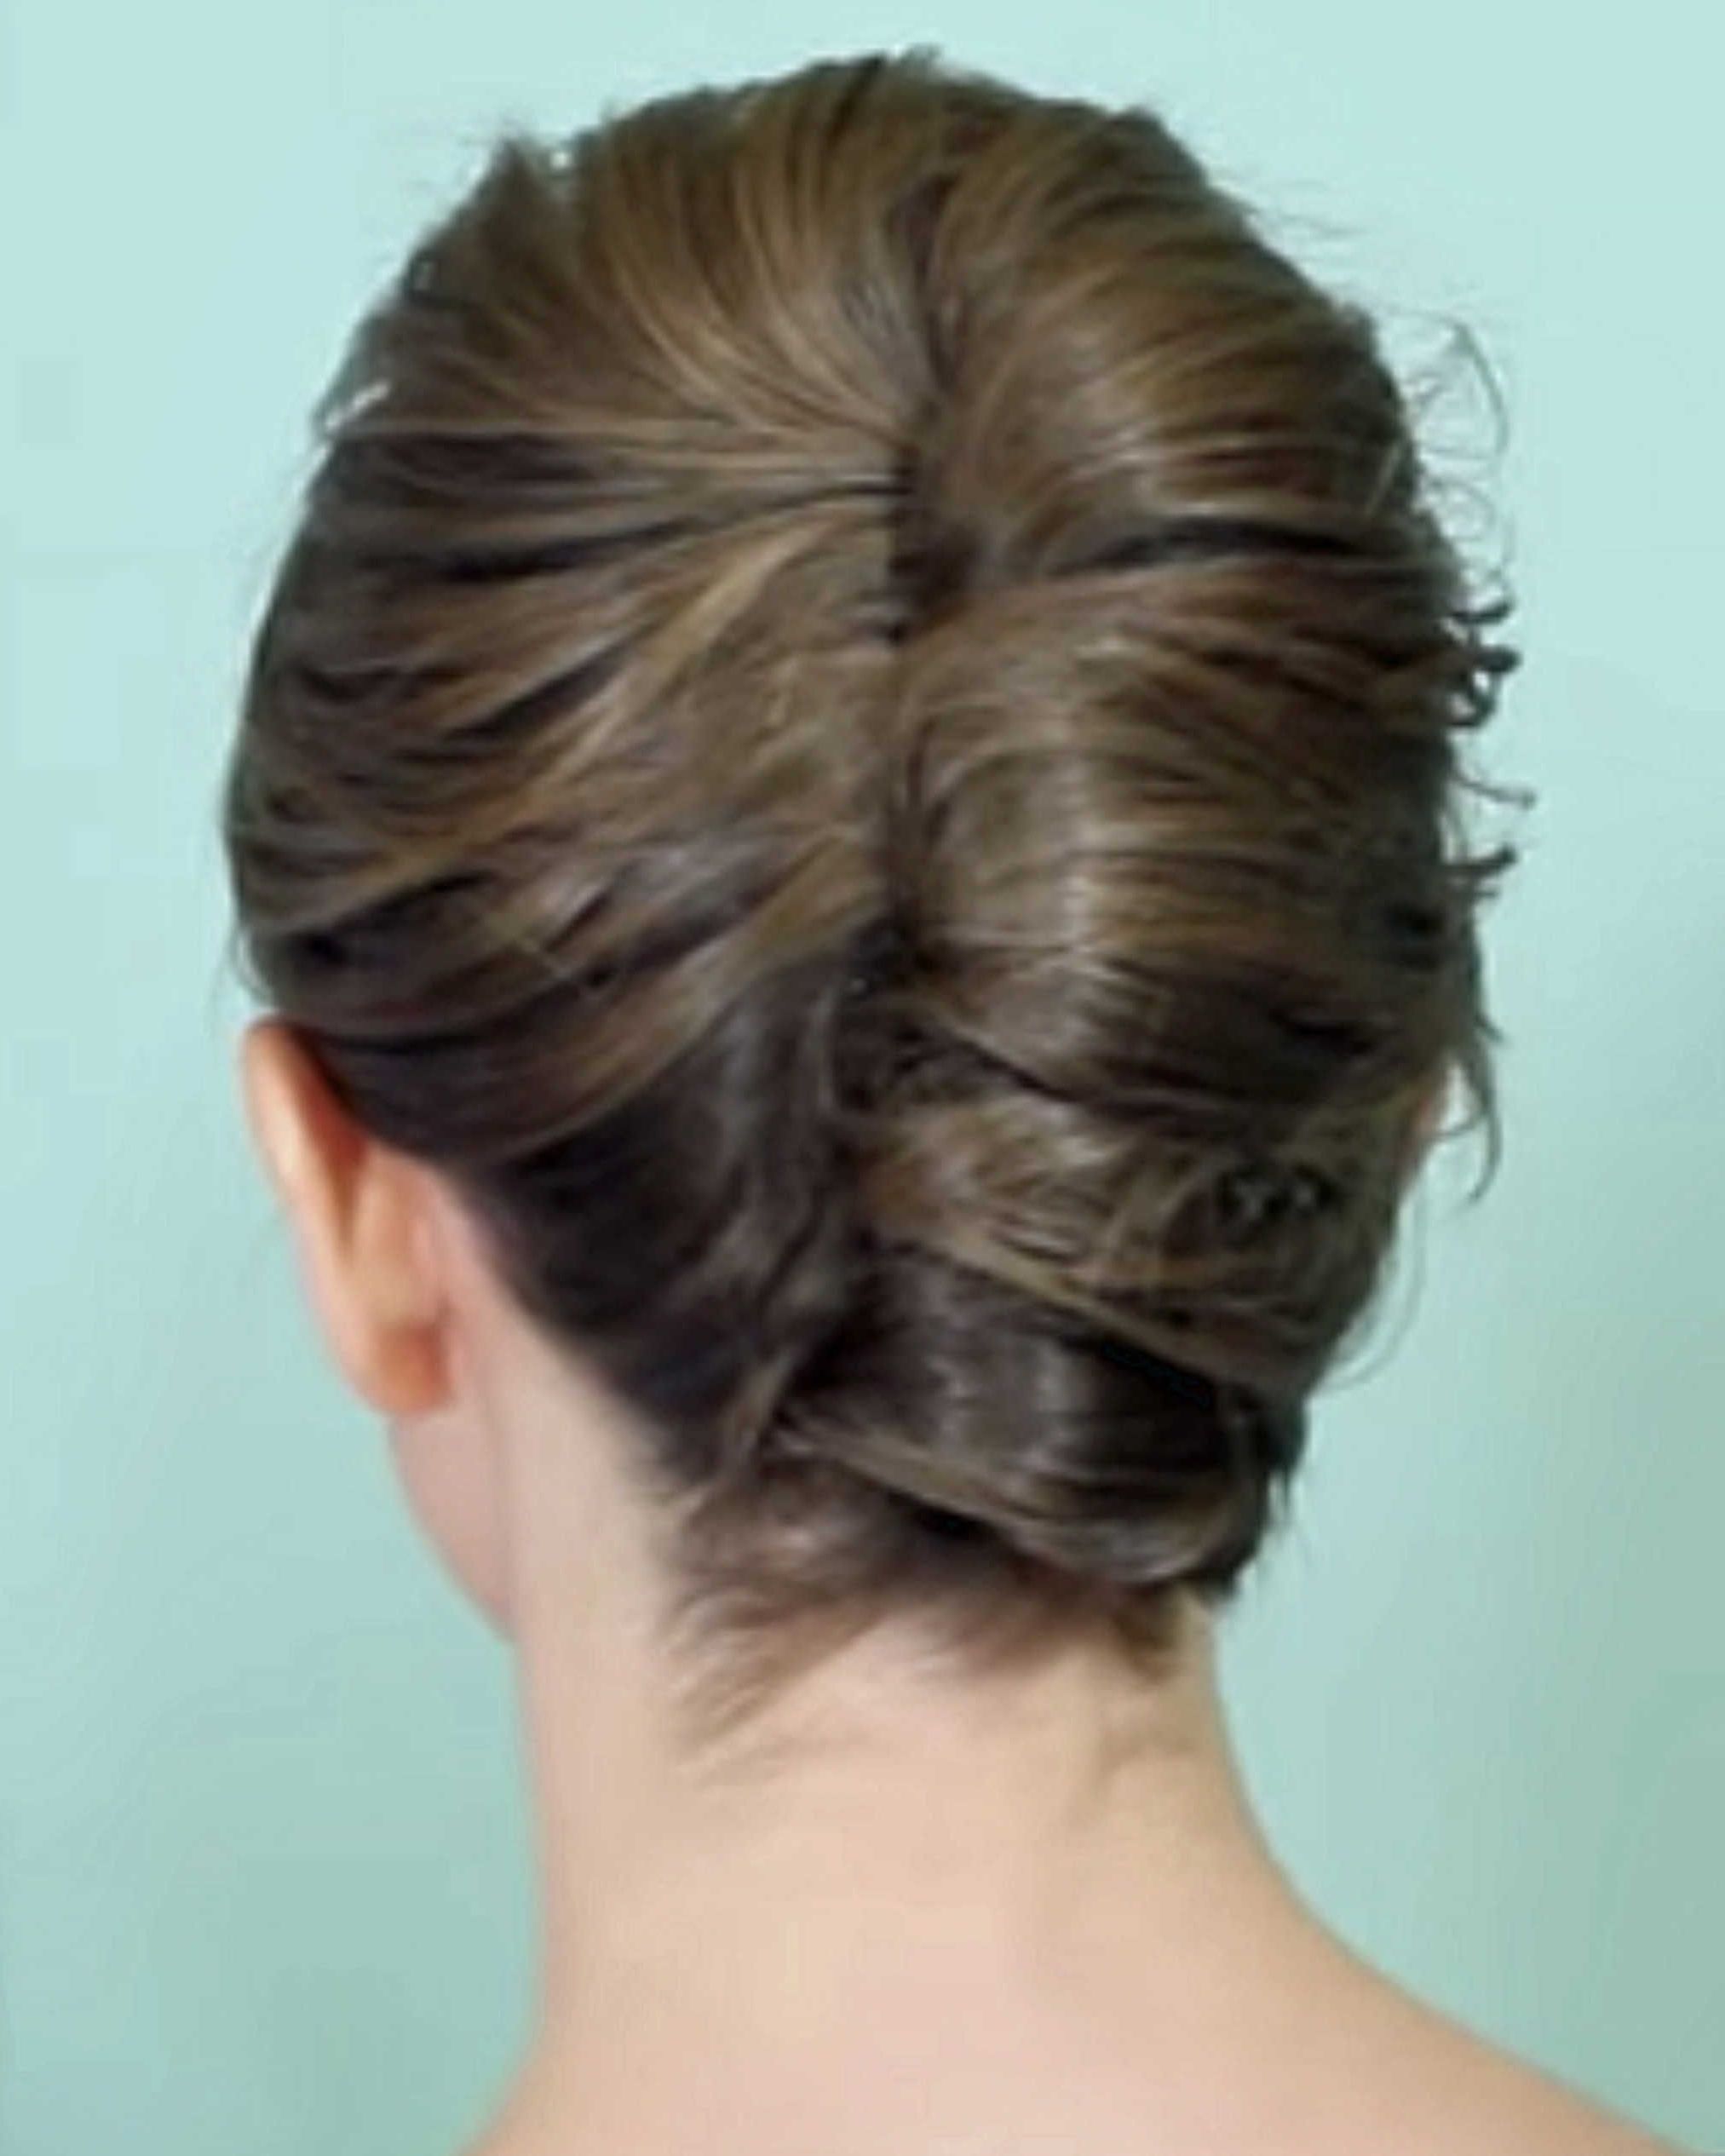 A Simple French Twist For Short Hair | French Twists, Updo And Short Throughout Everyday Updos For Short Hair (View 13 of 15)